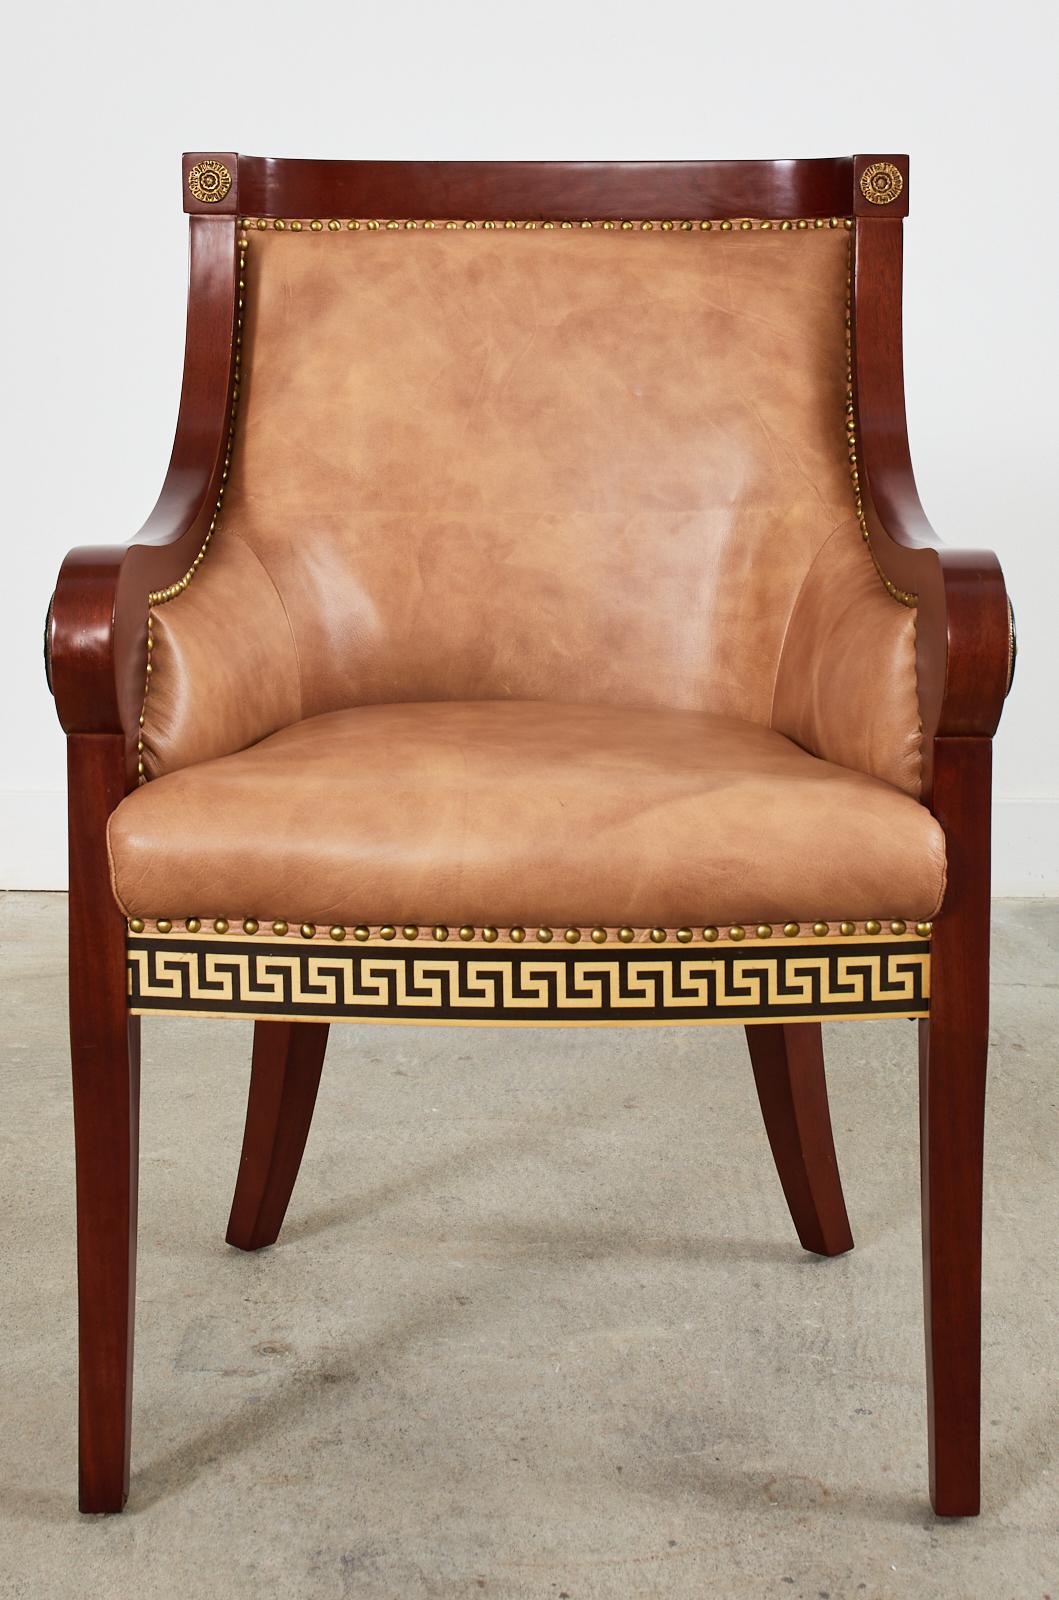 Pair of Empire Style Armchairs with Versacesque Decoration For Sale 5